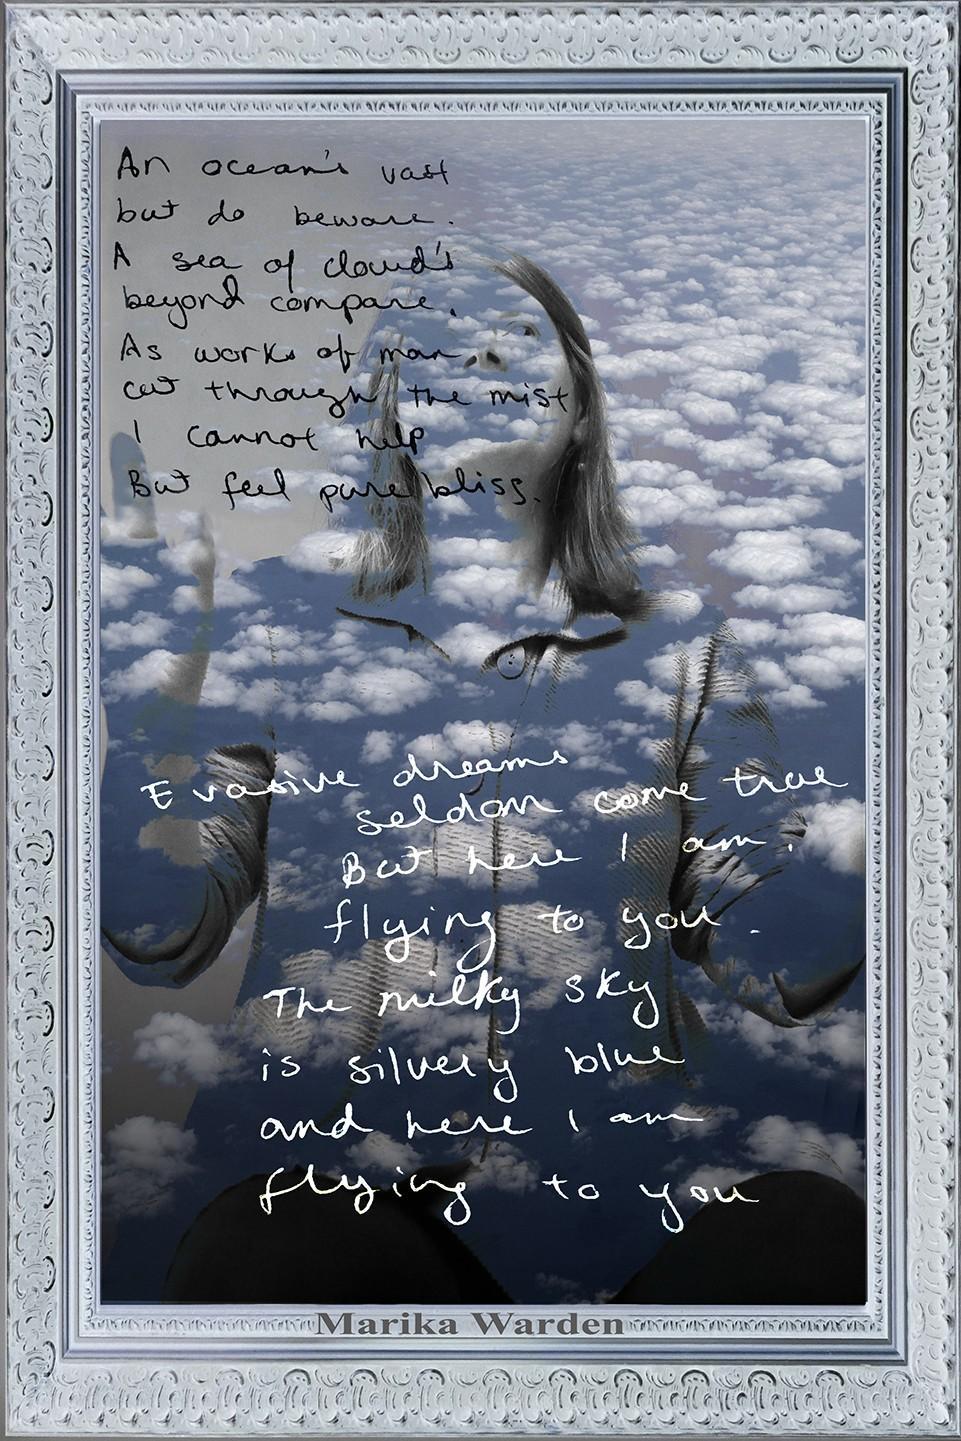 Robin Botie of Ithaca, New York, photoshops a poem written by her daughter who died of leukemia onto her photograph of a sea of clouds.